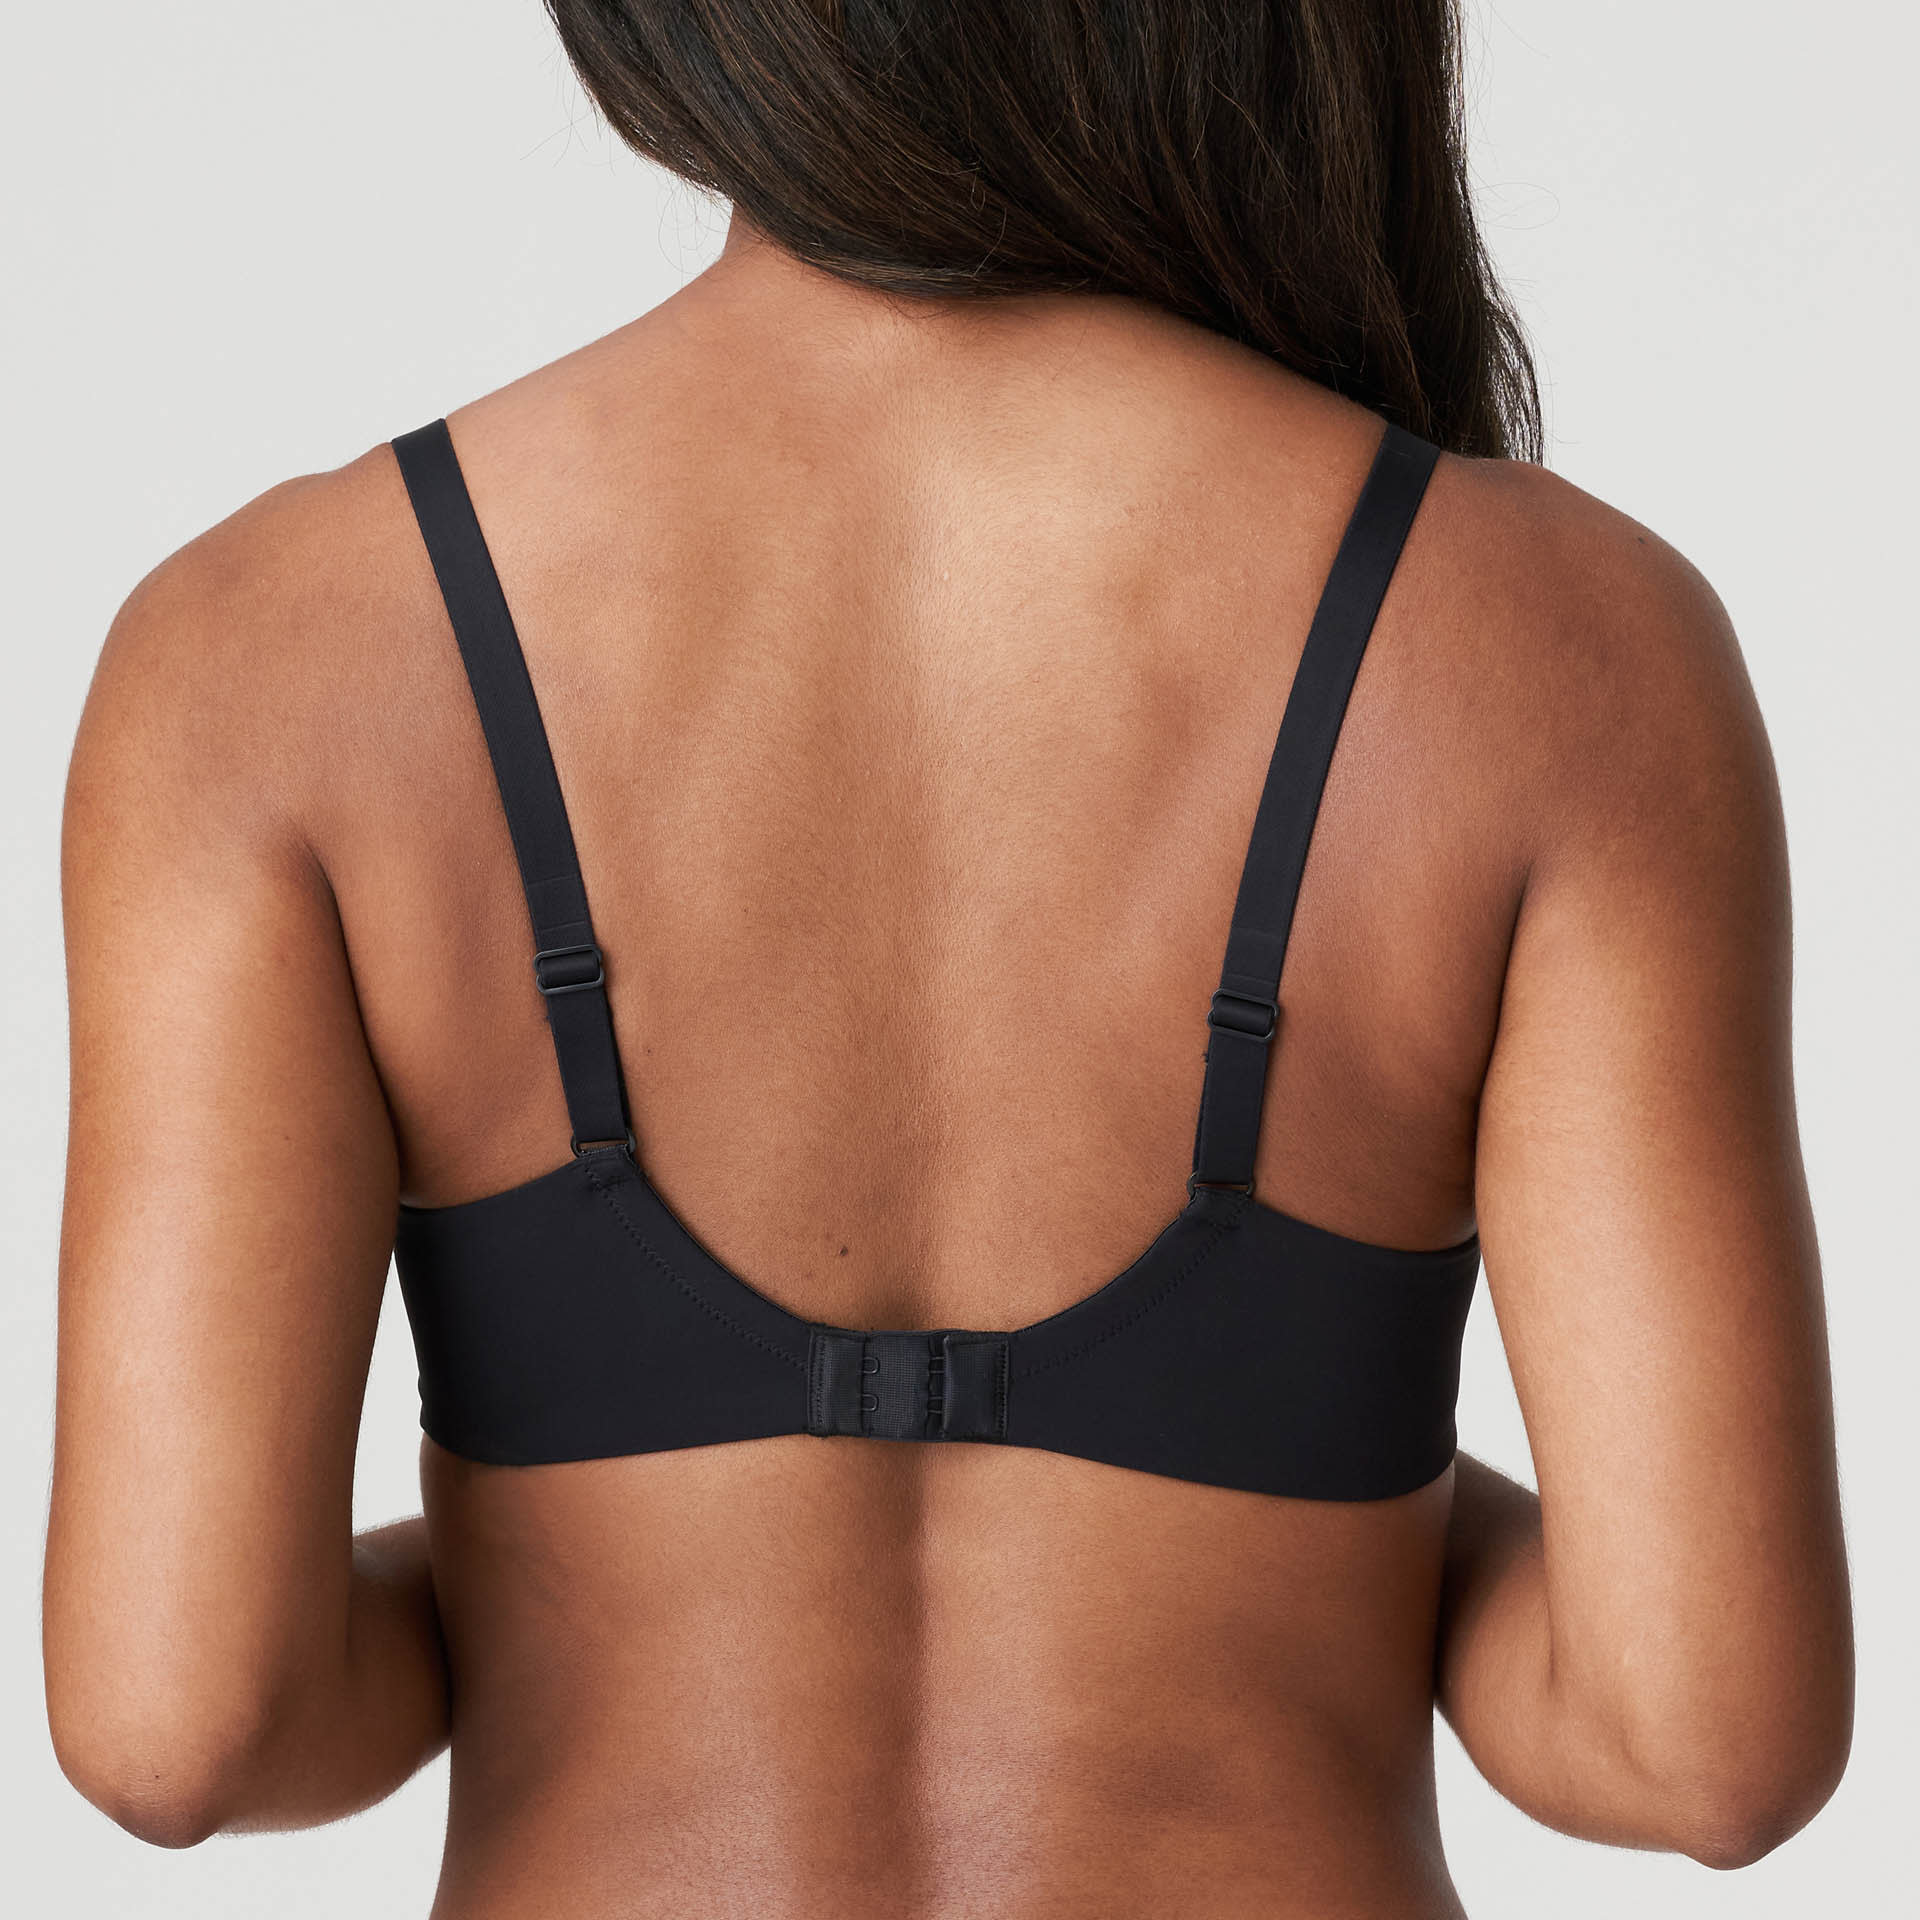 Bra marks on the back. The girl rubbed her back - Stock Photo [85461508]  - PIXTA